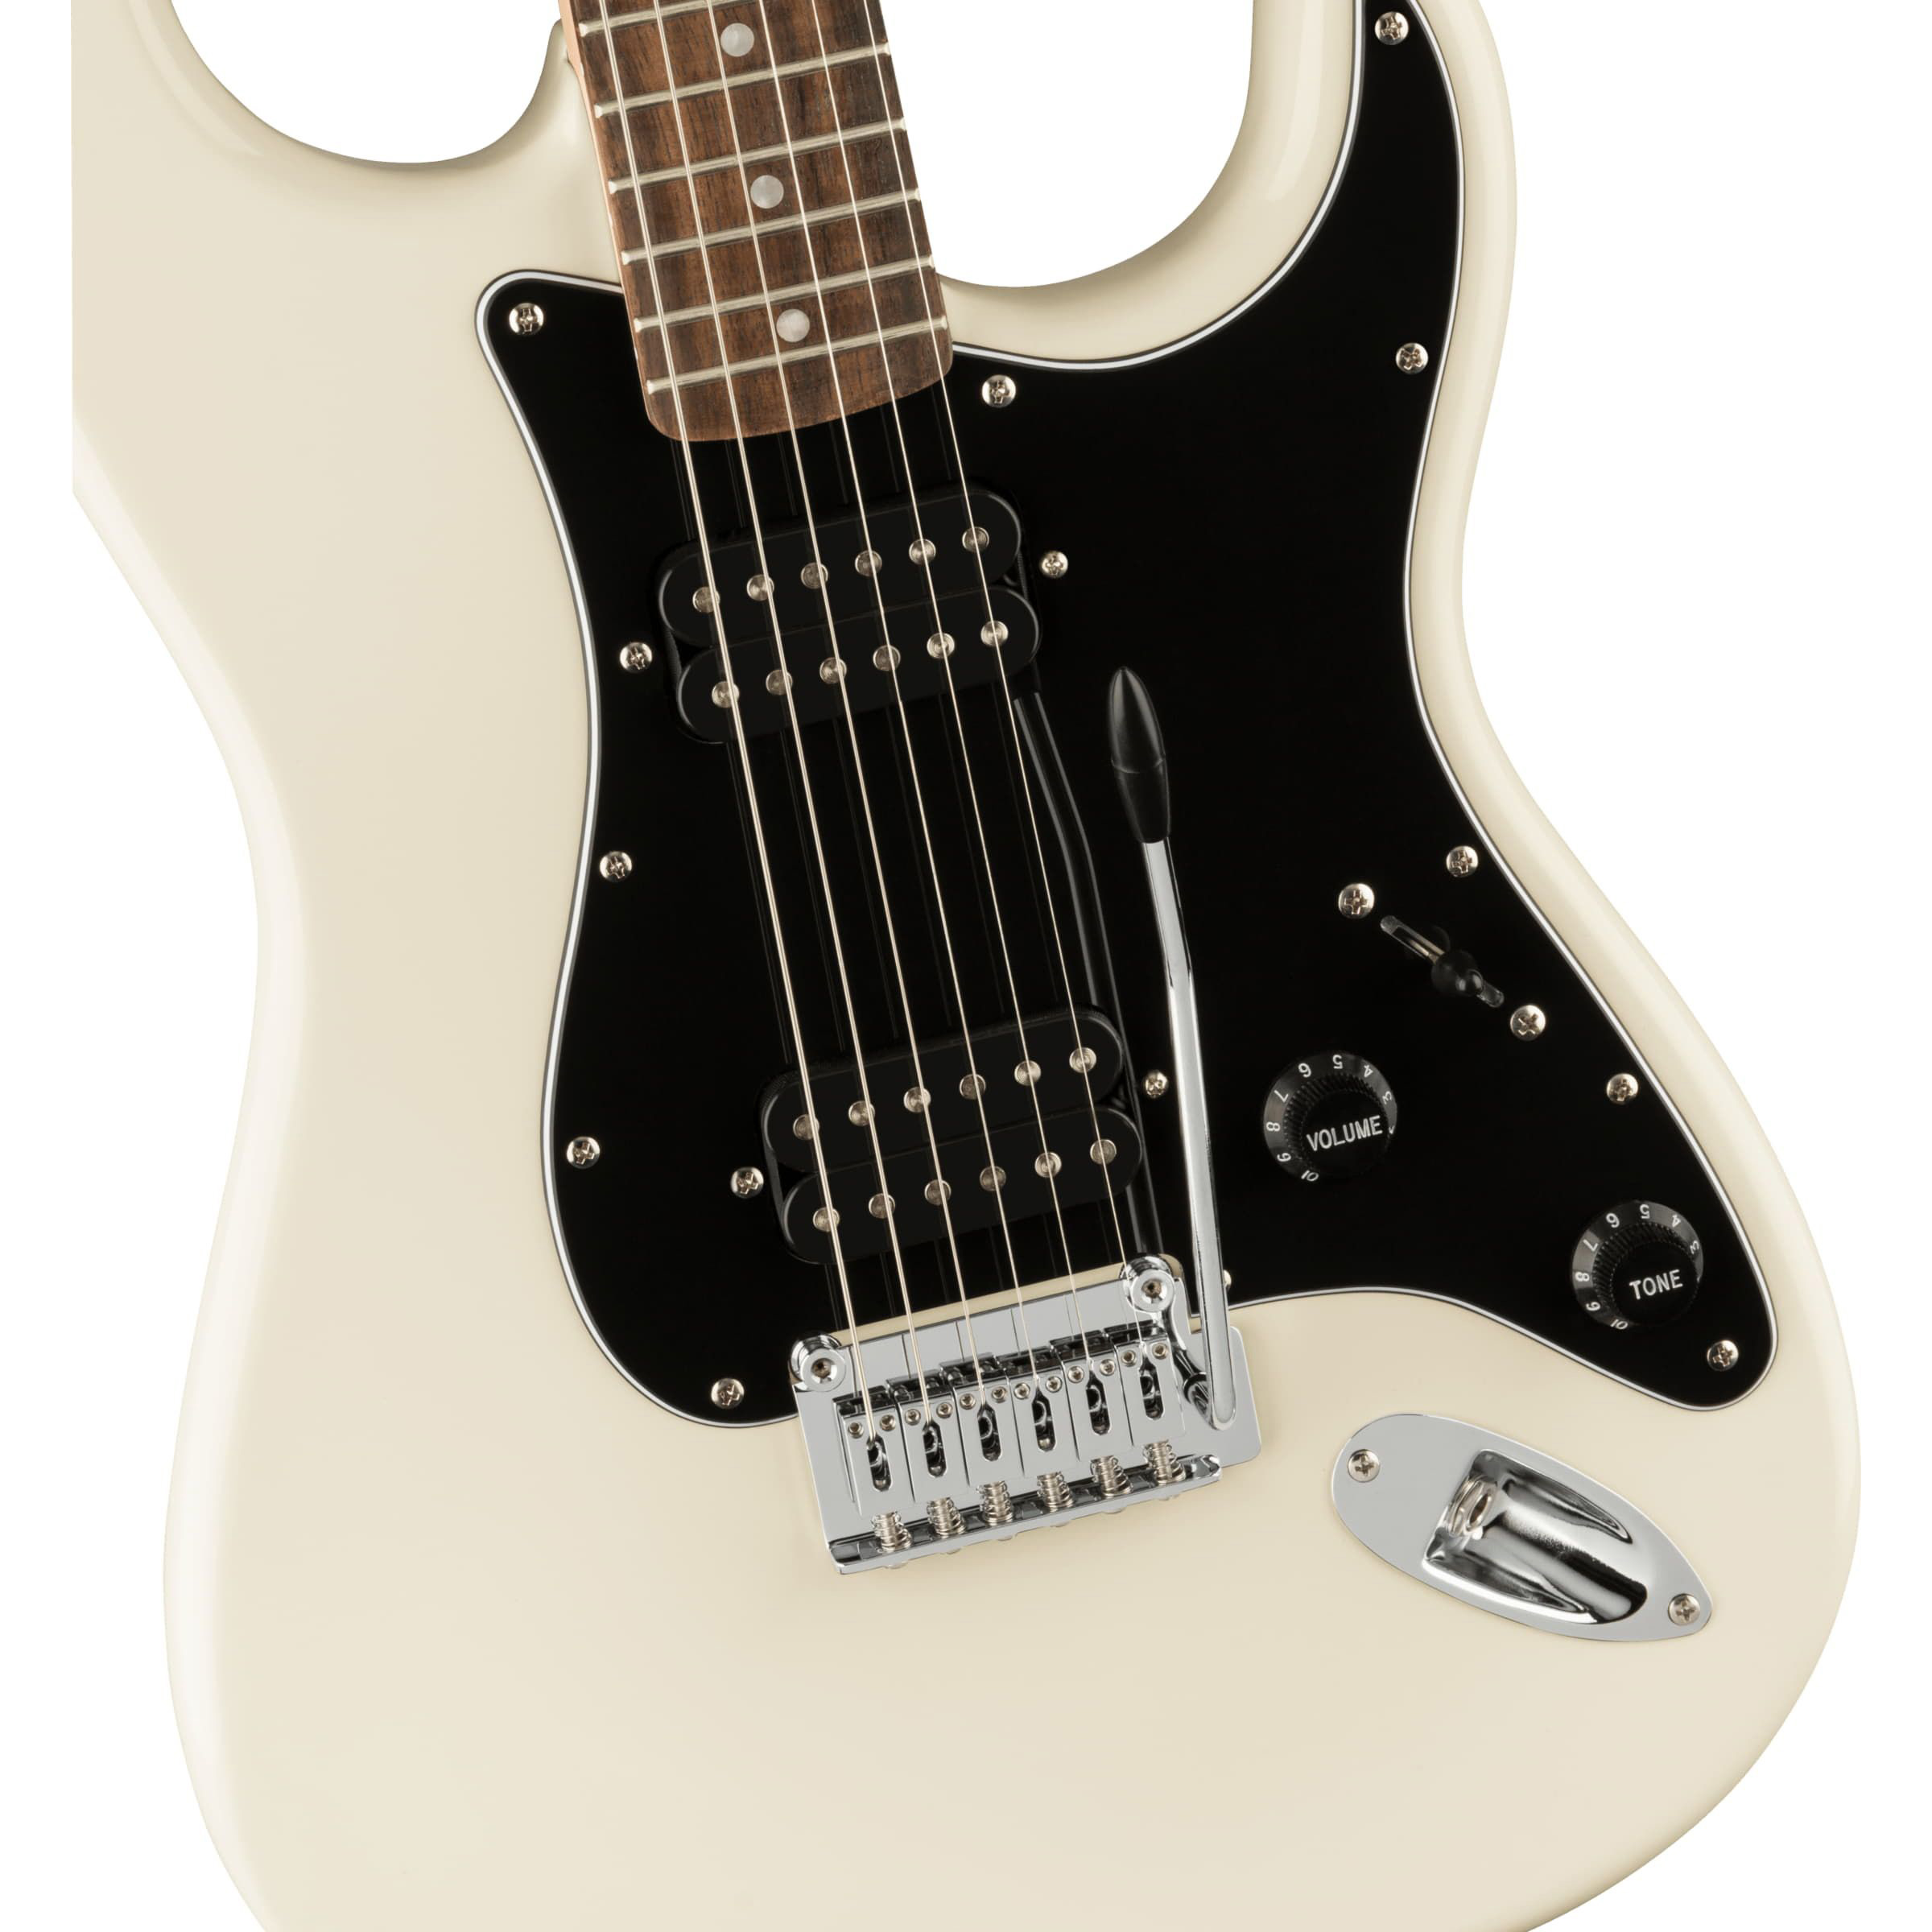 Affinity stratocaster. Squier Strat Affinity. Squier Affinity 2021. Squier Affinity 2021 Stratocaster HH LRL Olympic White. Гитара Fender Squier Stratocaster Affinity.